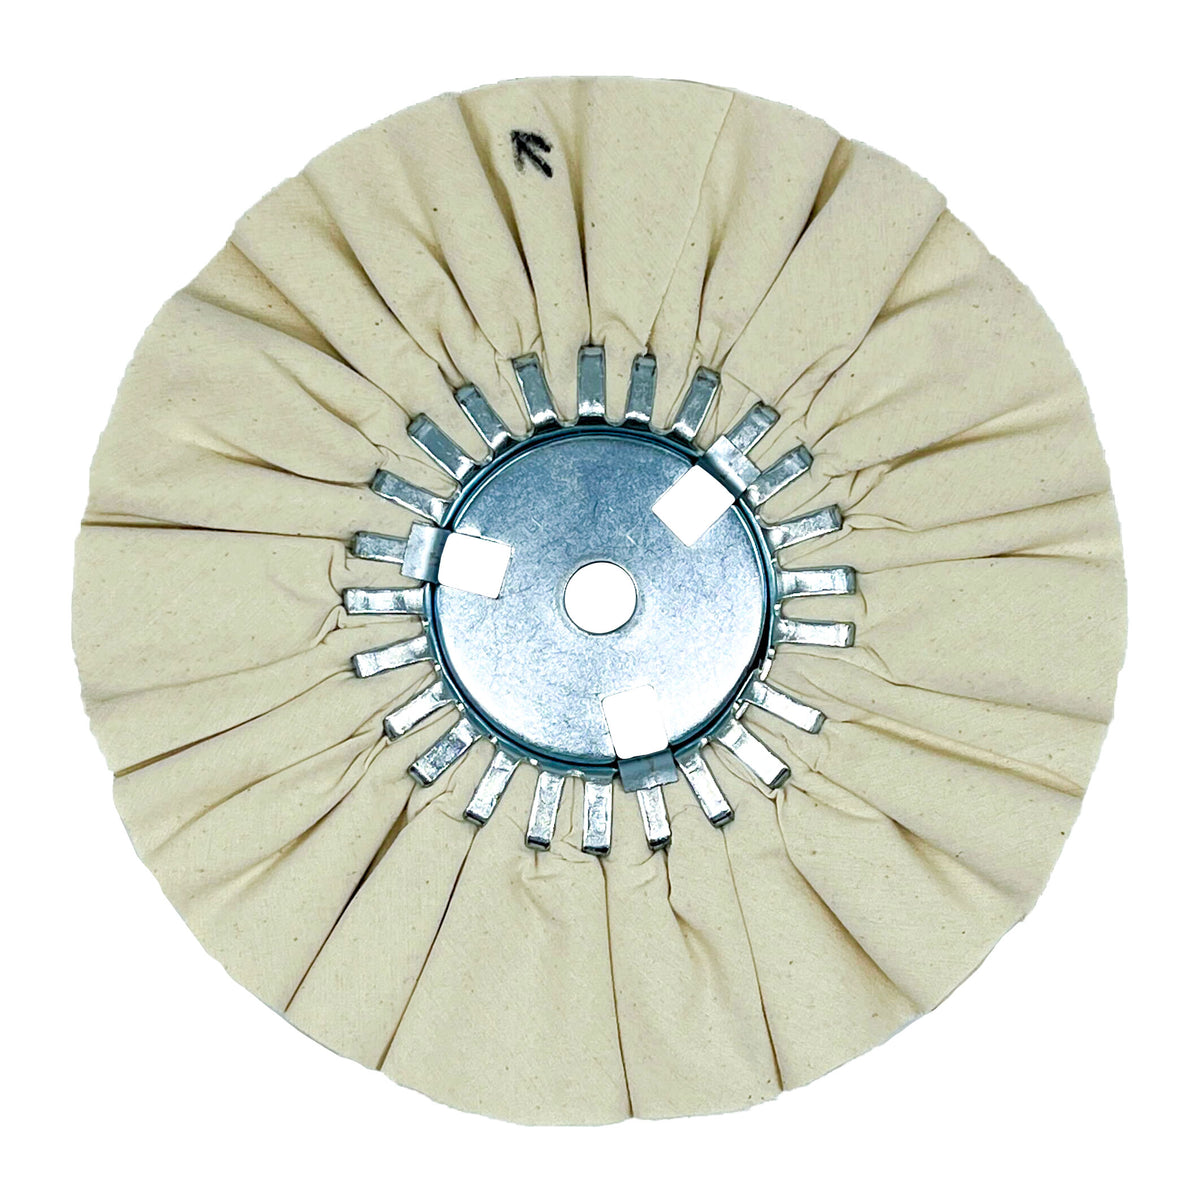 Renegade Products USA Muslin UBM Airway Buffing Wheel with Center Plate - Professional Buffing Tool for Precise Polishing and Finishing